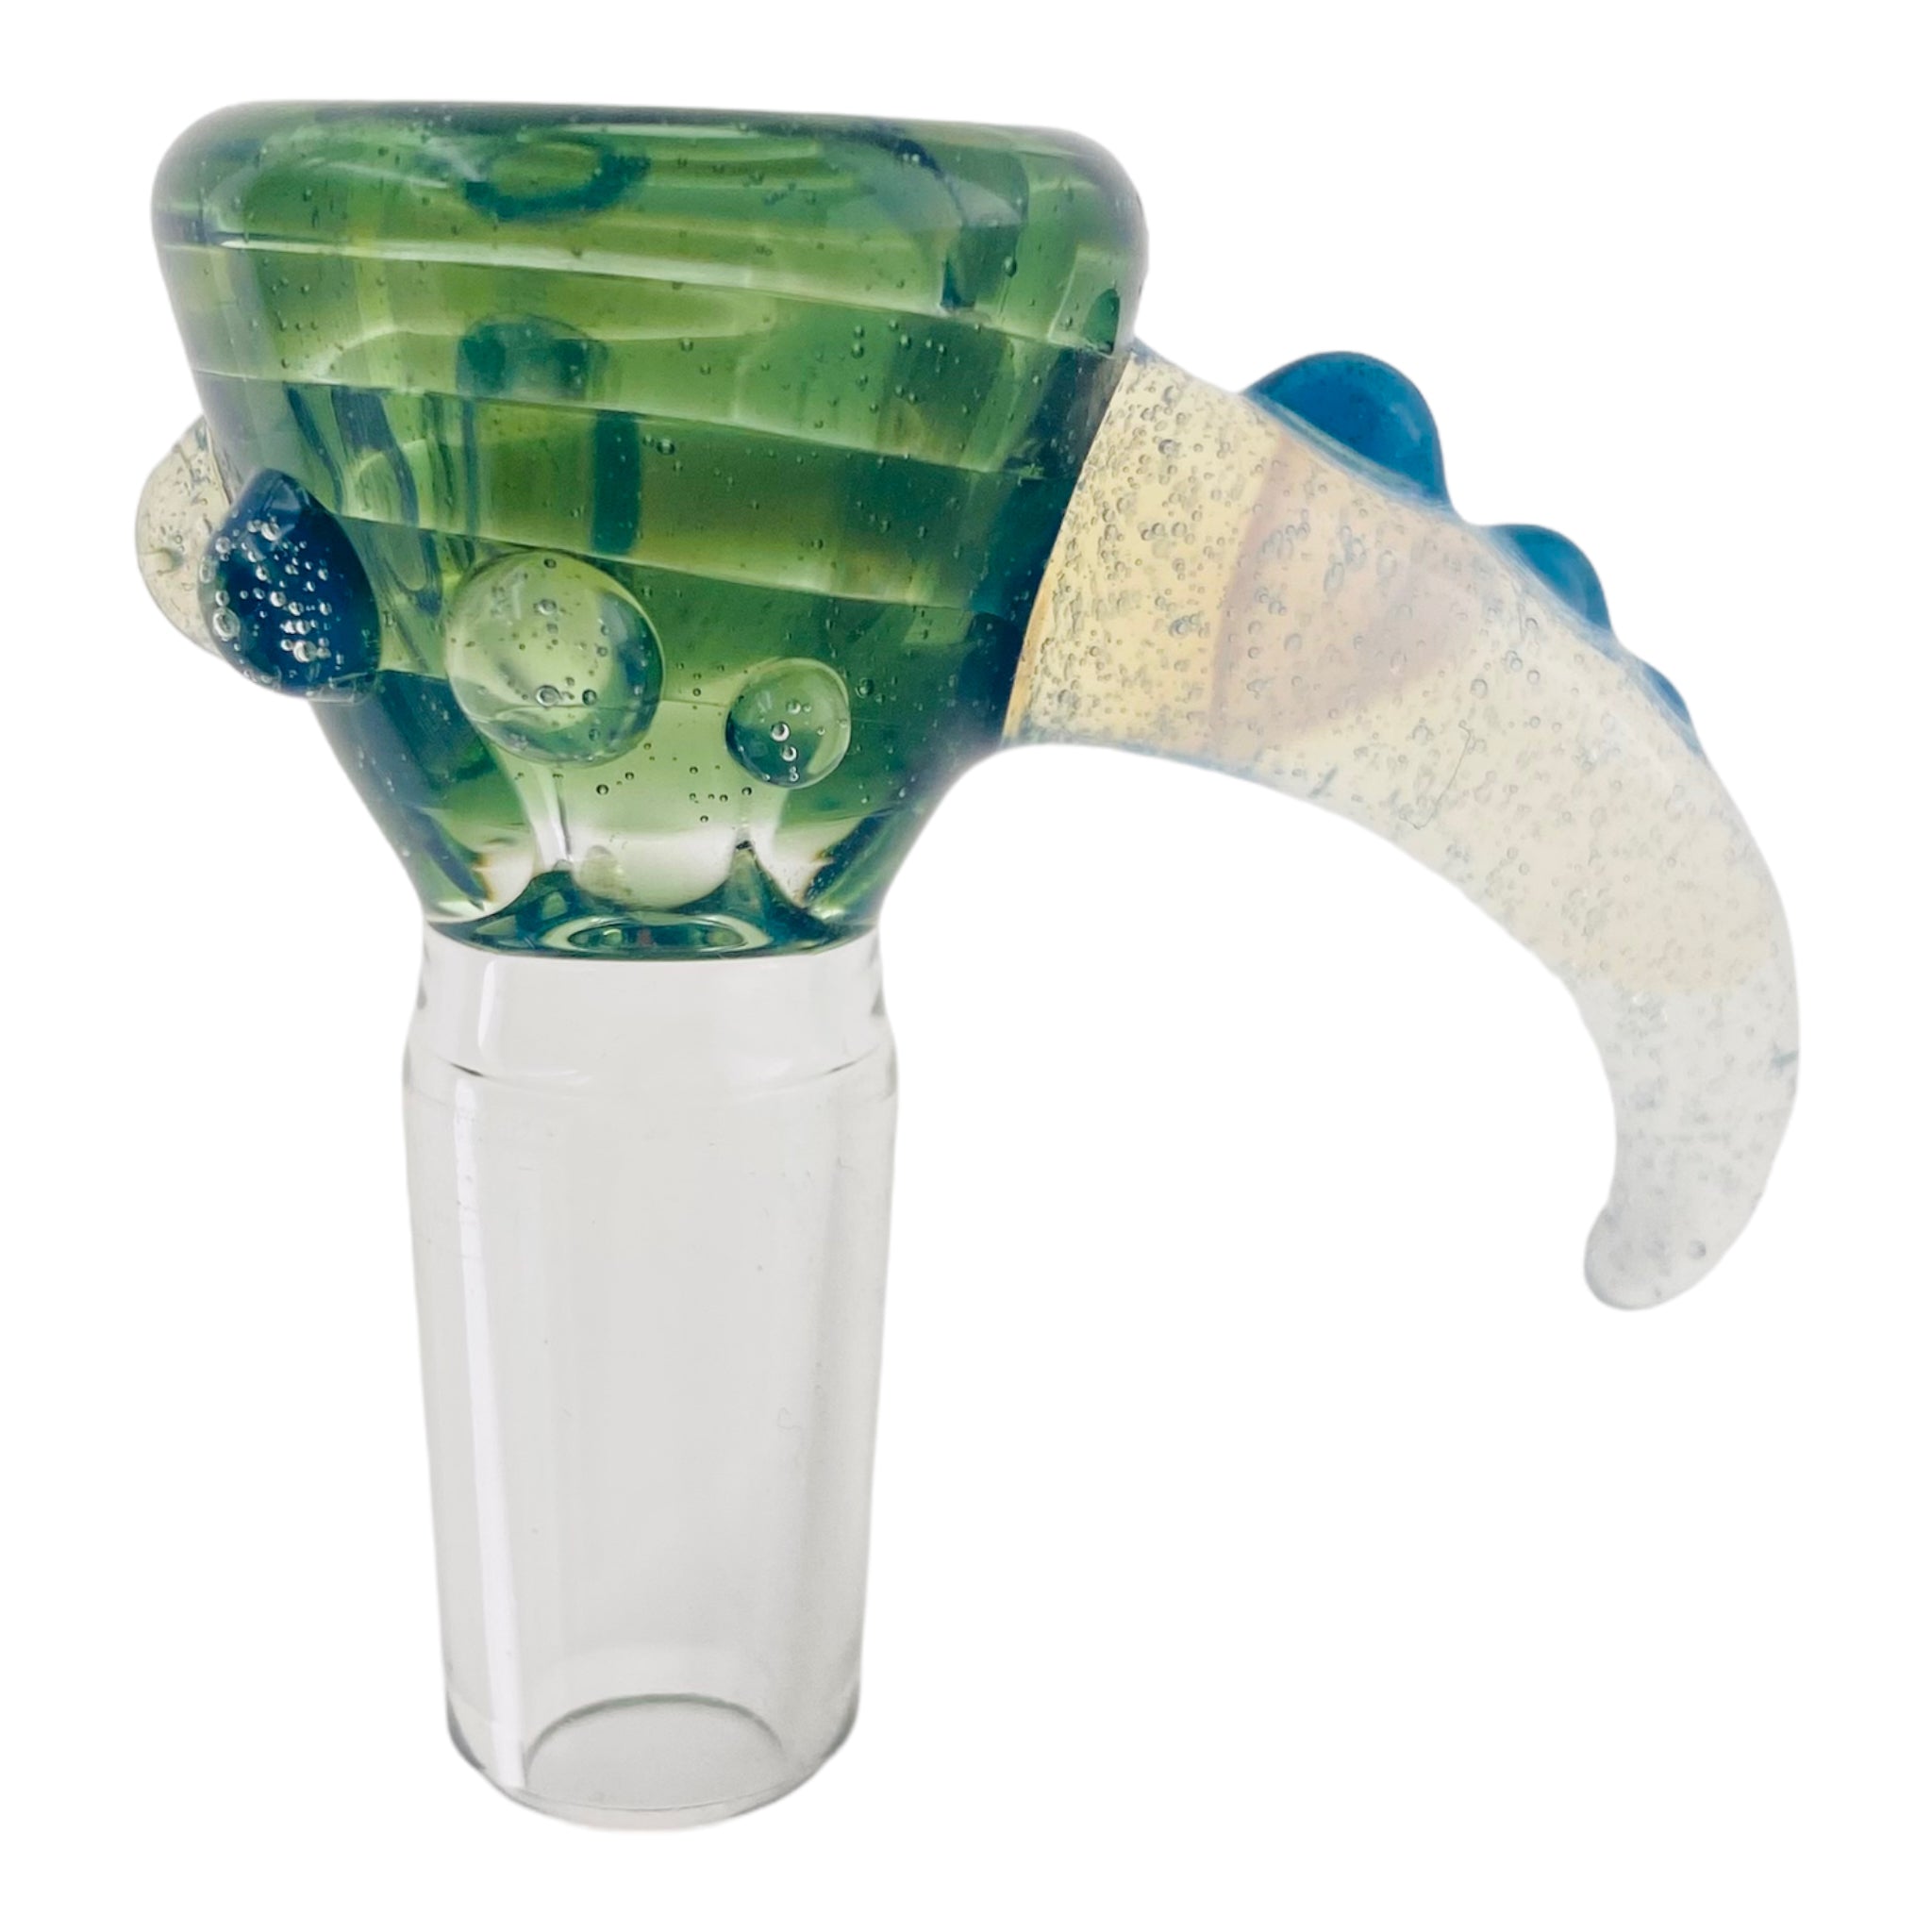 Arko Glass - 14mm Flower Bowl - Green Bowl With Opaque Handle Horn